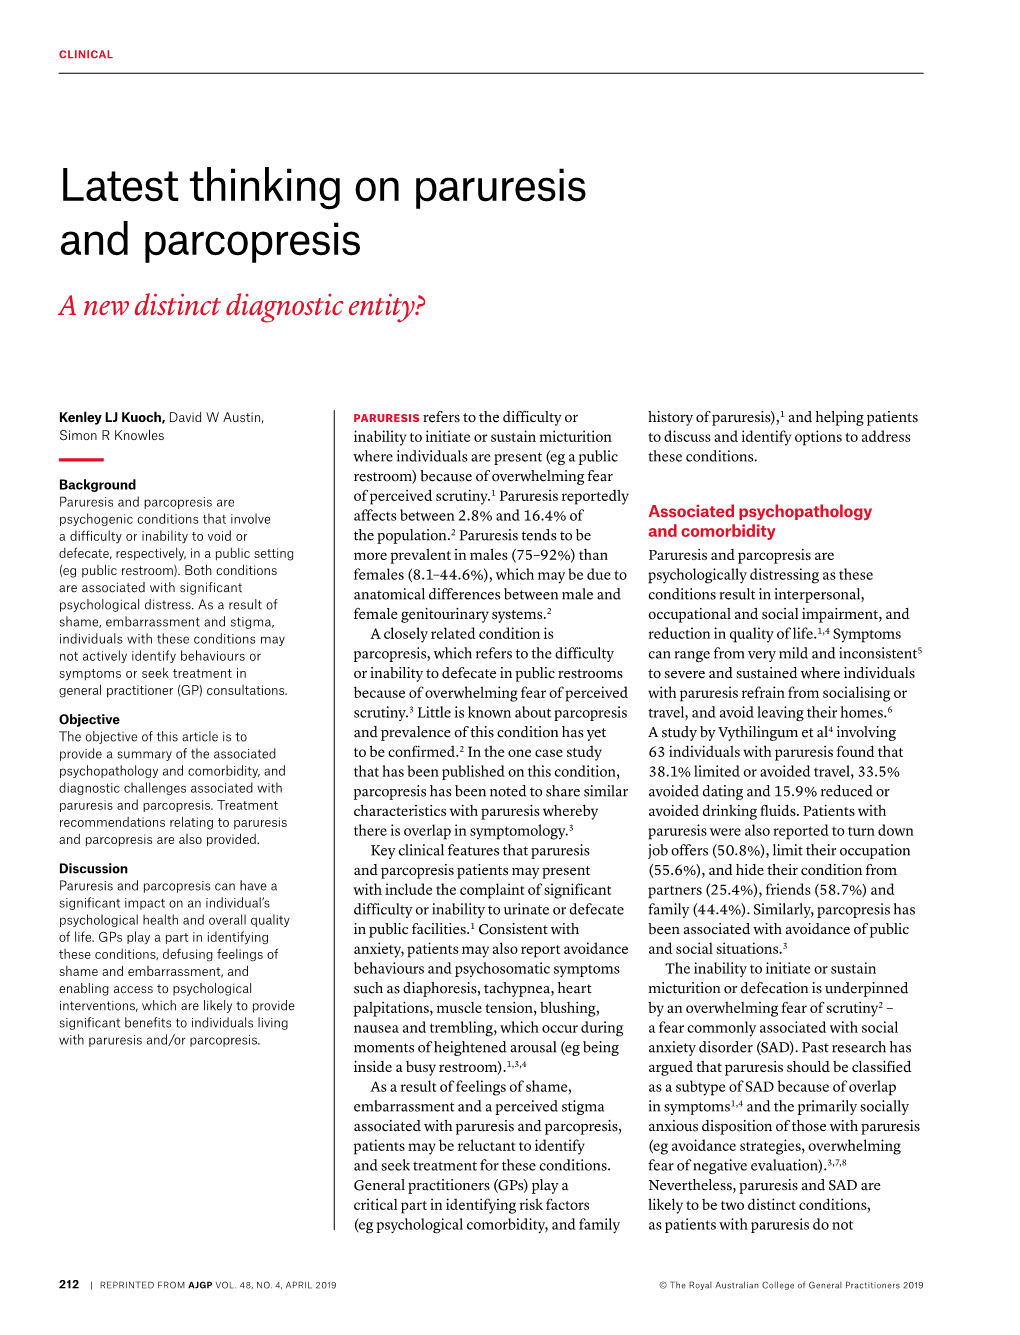 Latest Thinking on Paruresis and Parcopresis